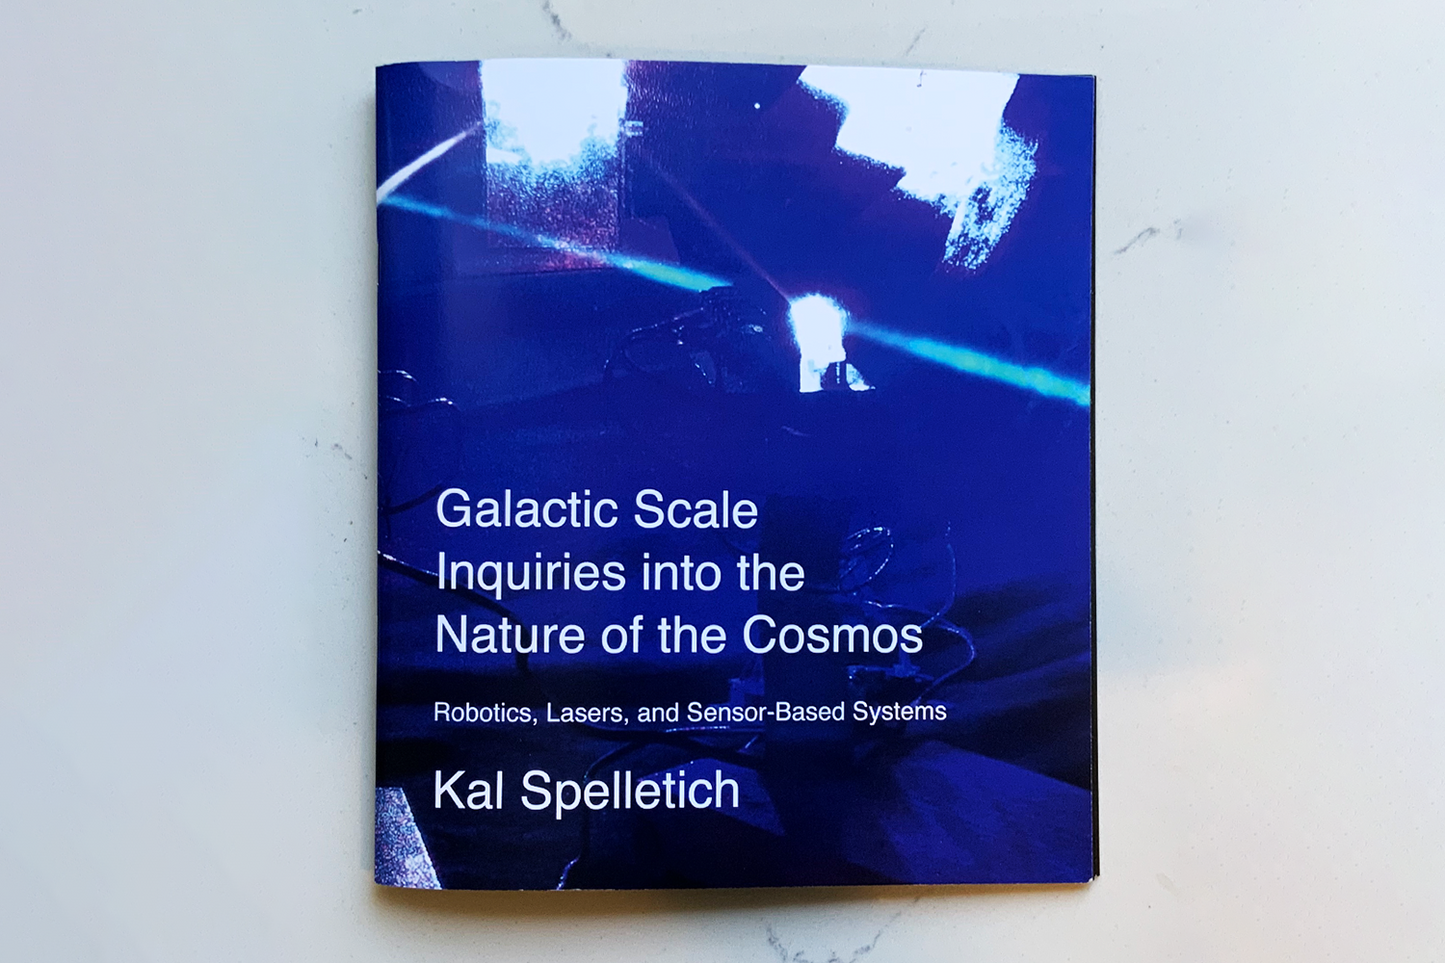 Galactic Scale Inquiries into the Nature of the Cosmos